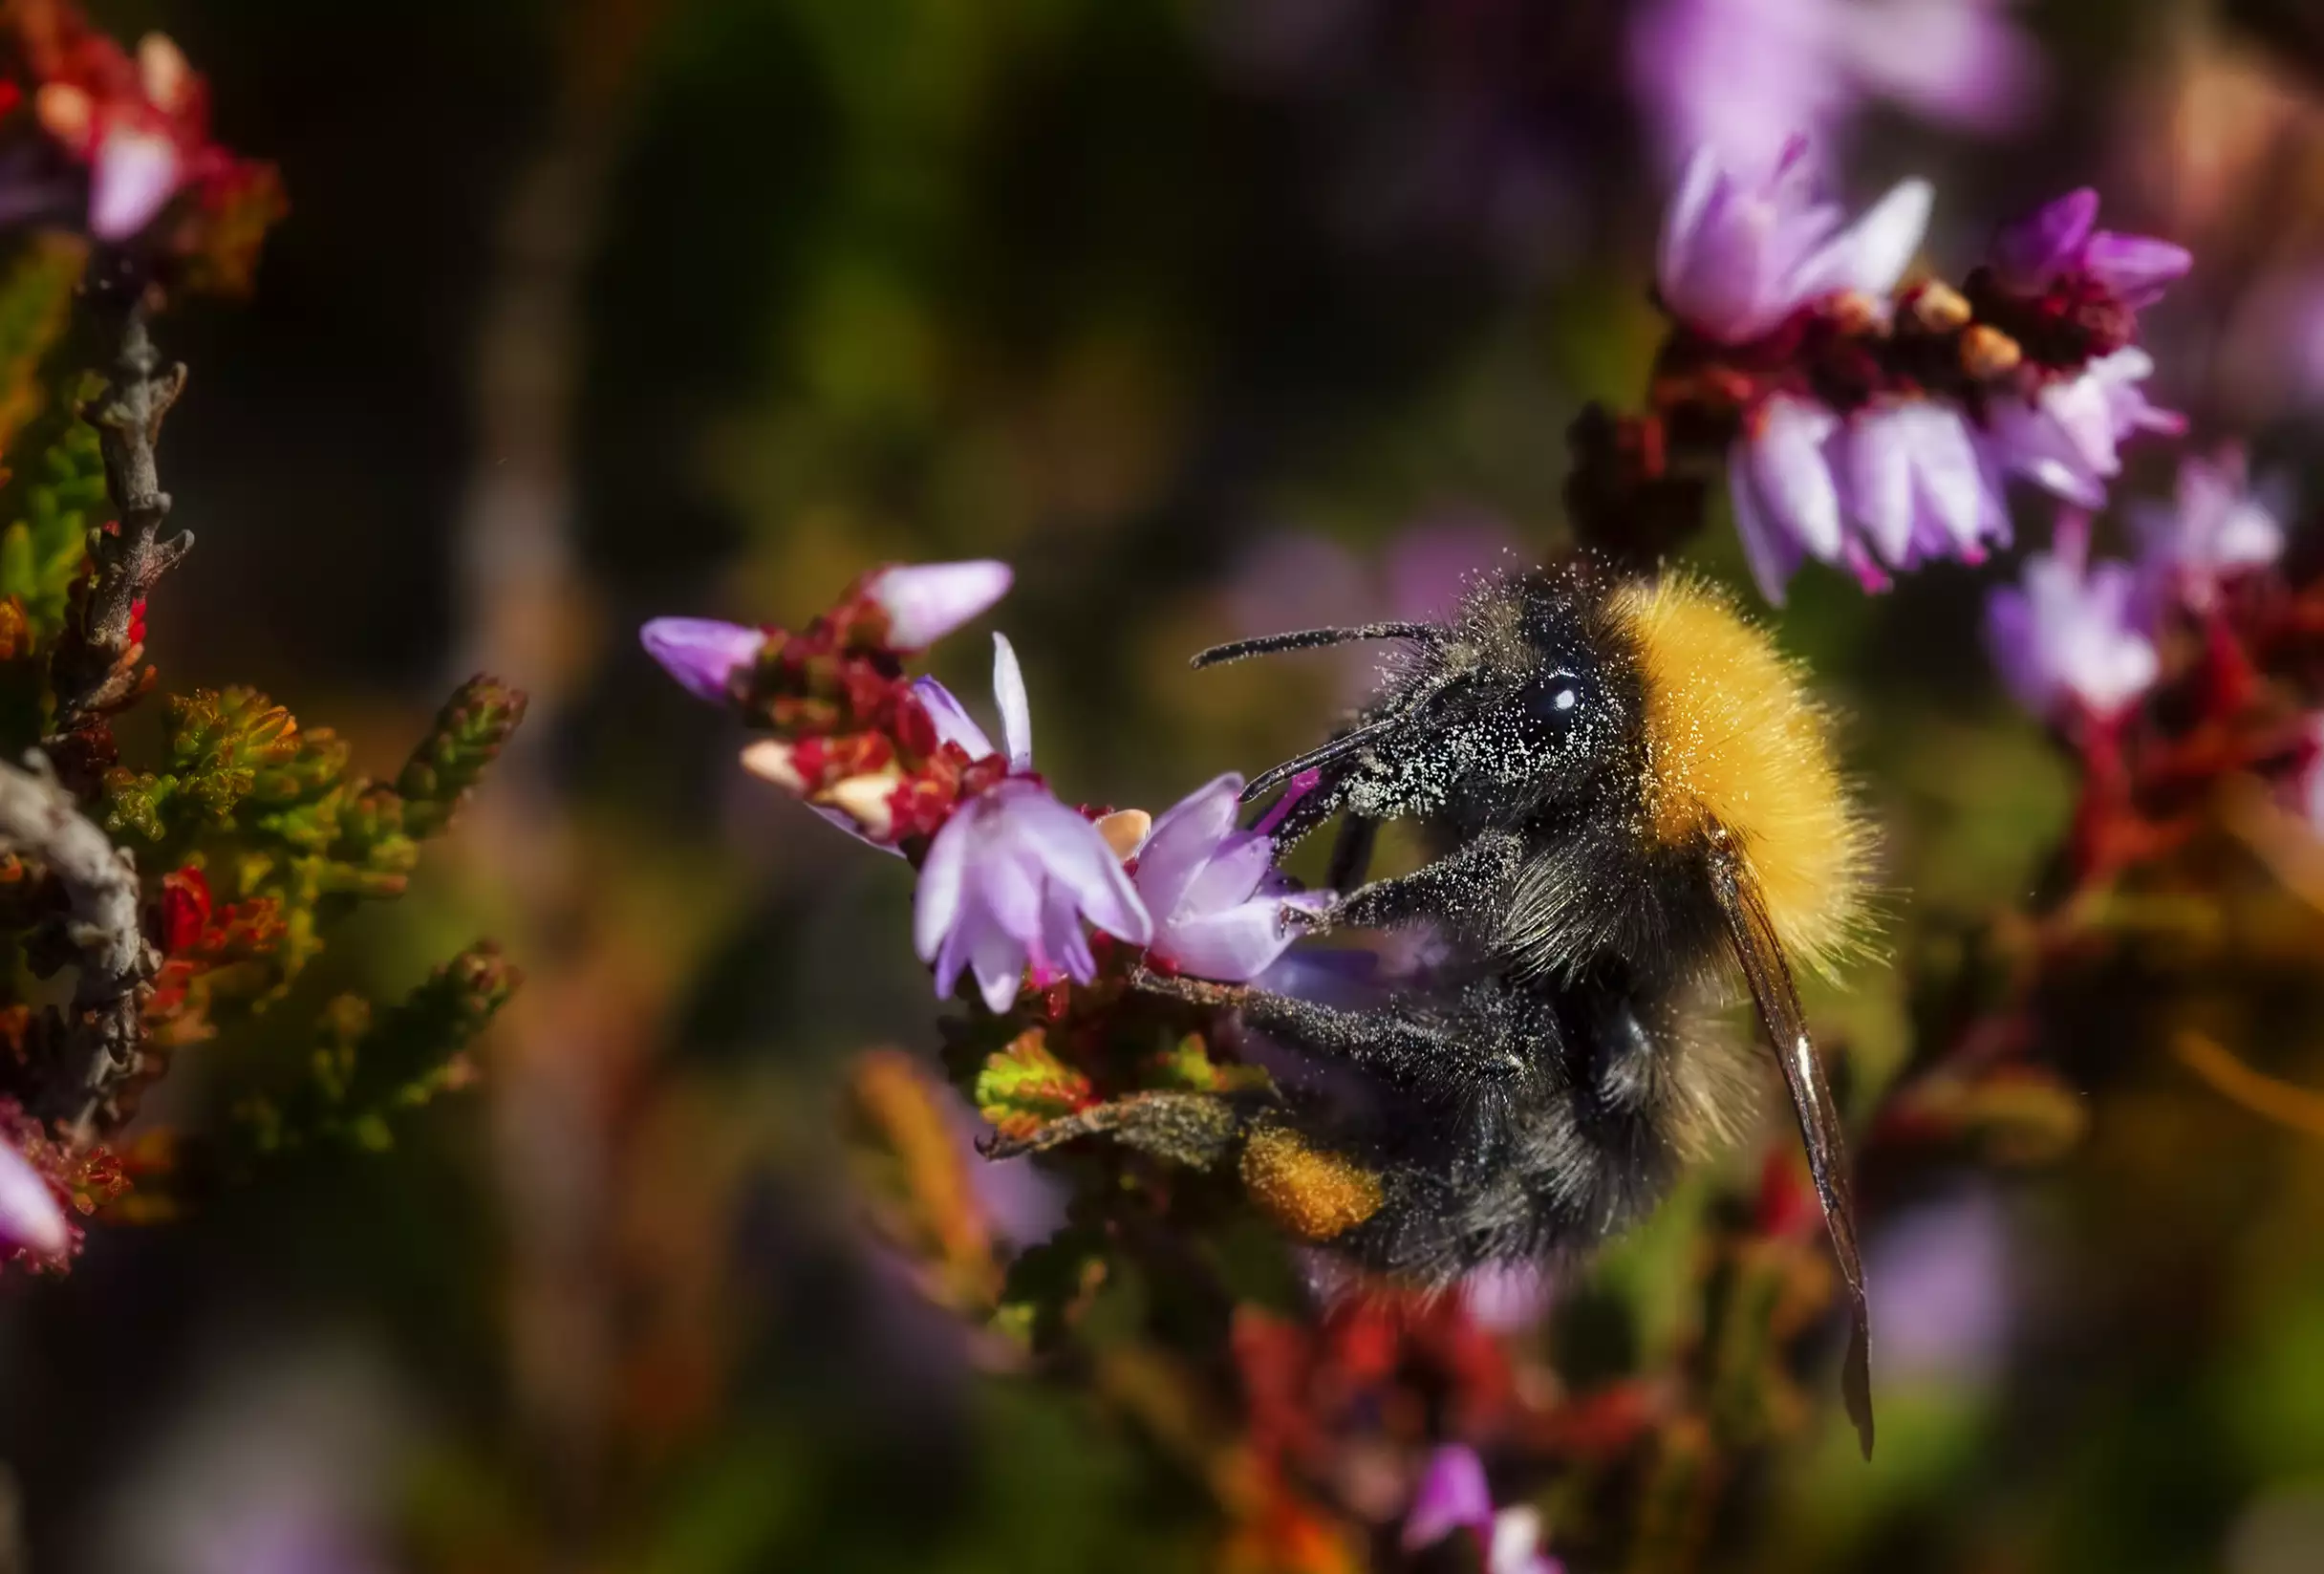 Bumblebee at work on a heather flower